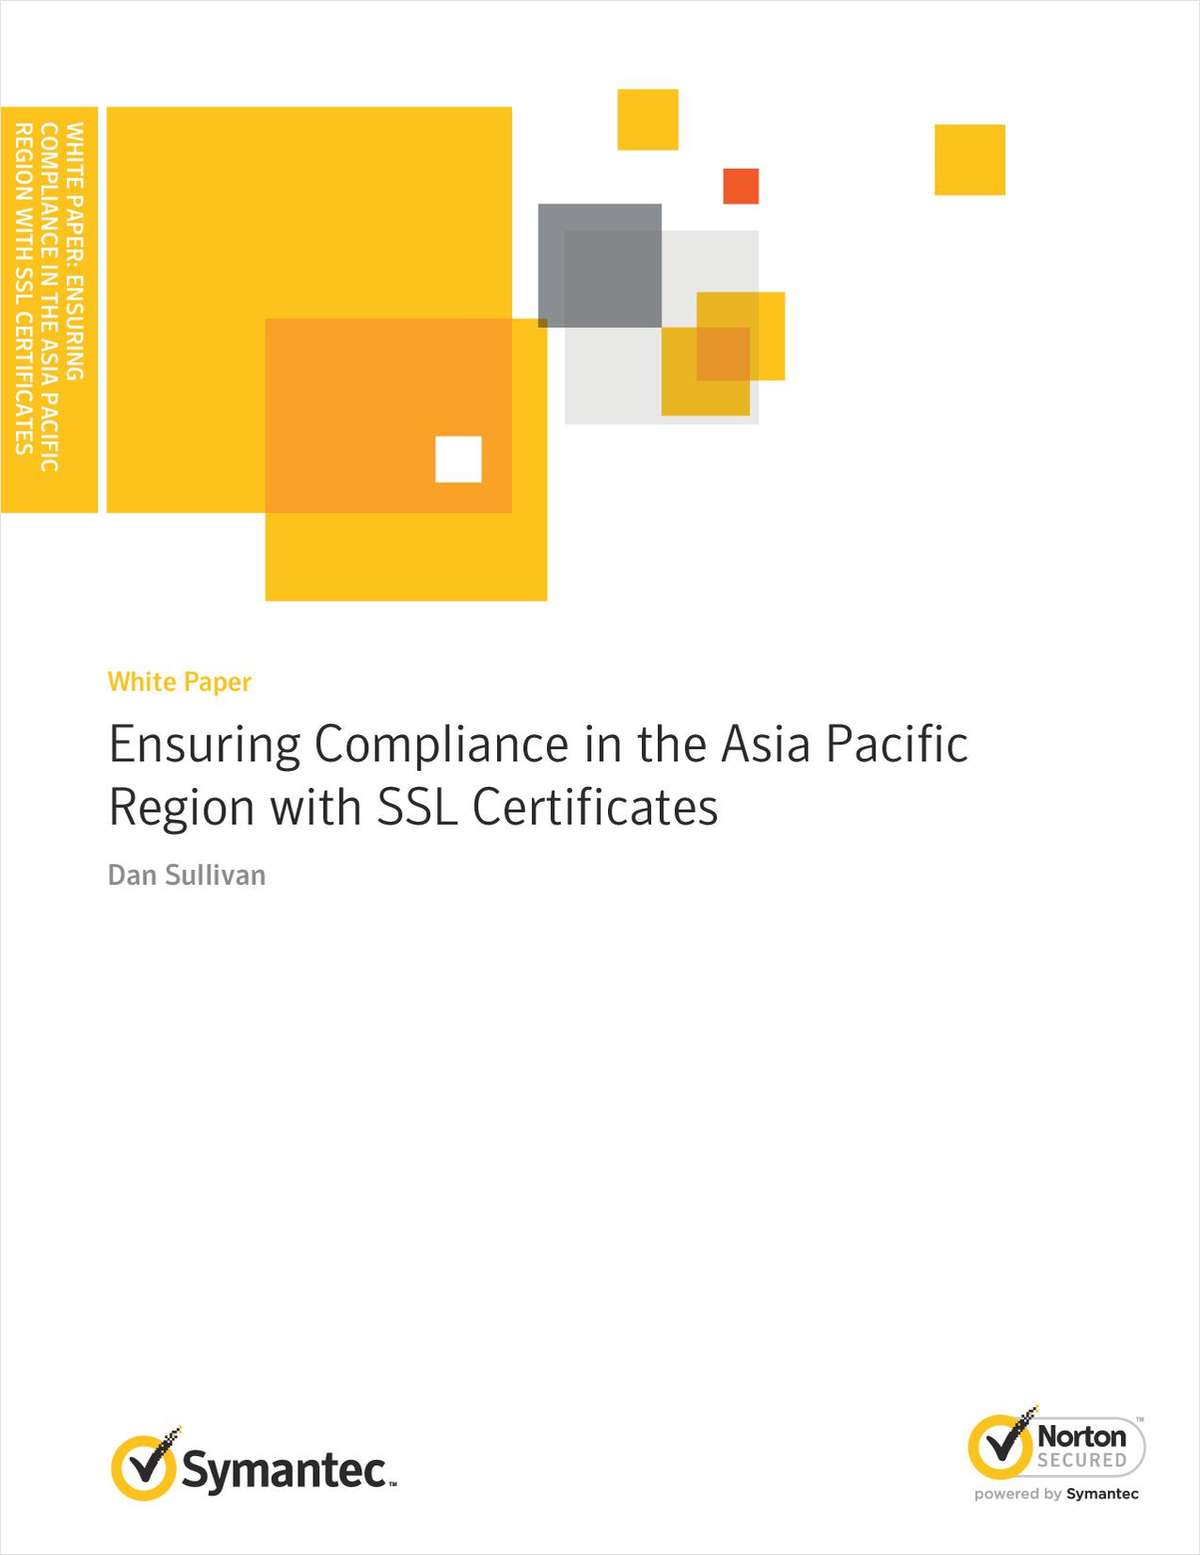 Ensuring Compliance in the Asia Pacific Region with SSL Certificates